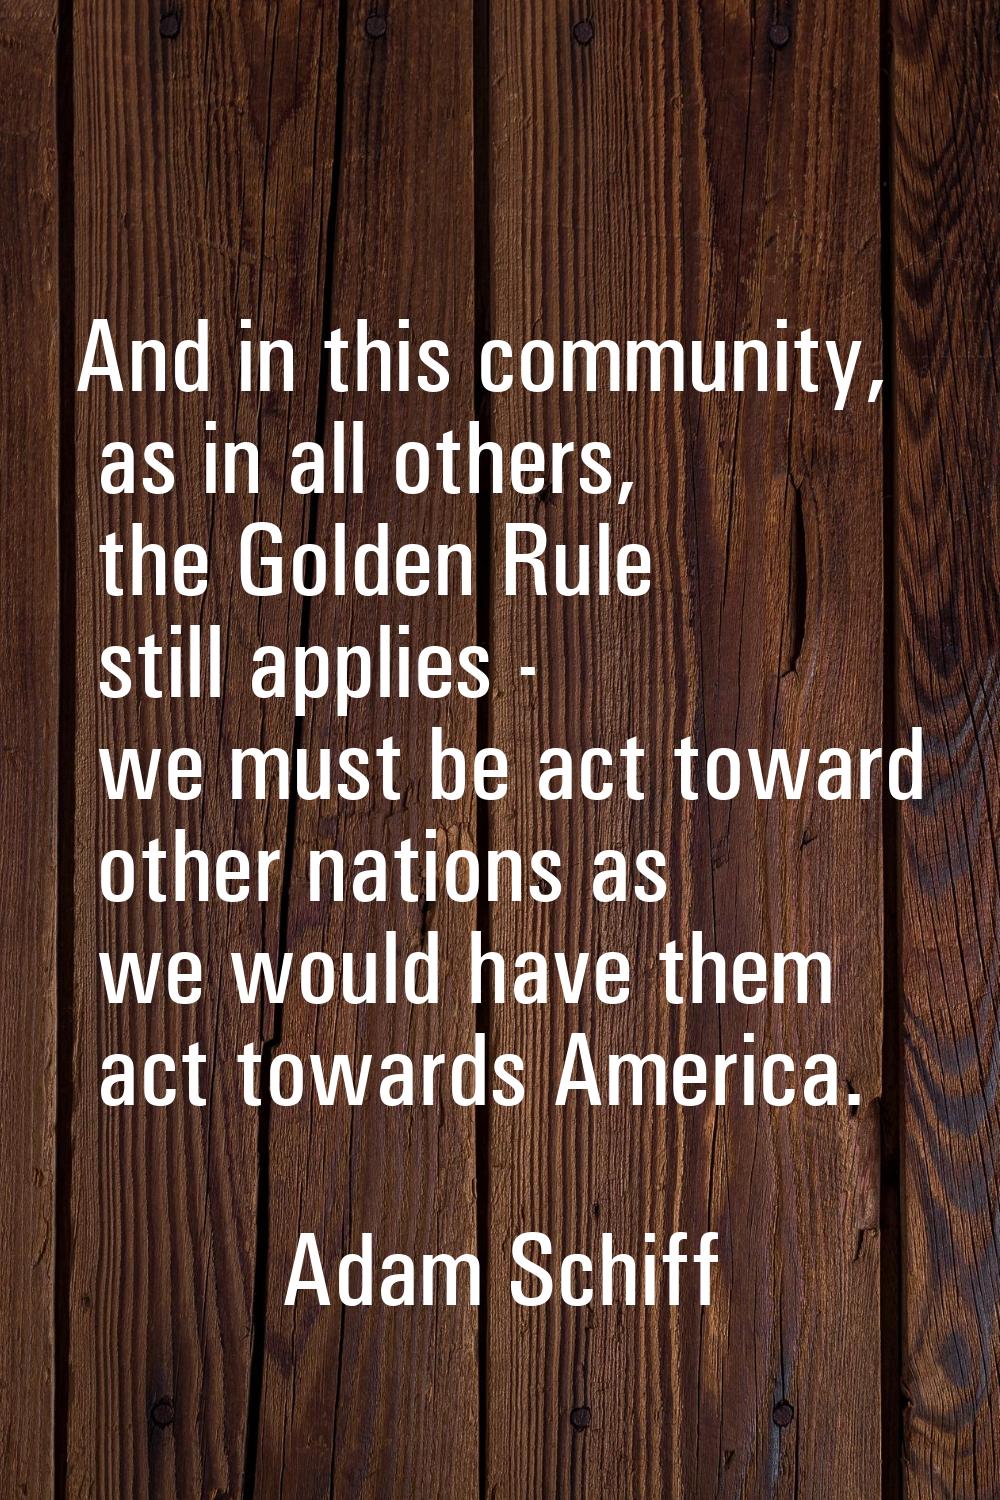 And in this community, as in all others, the Golden Rule still applies - we must be act toward othe